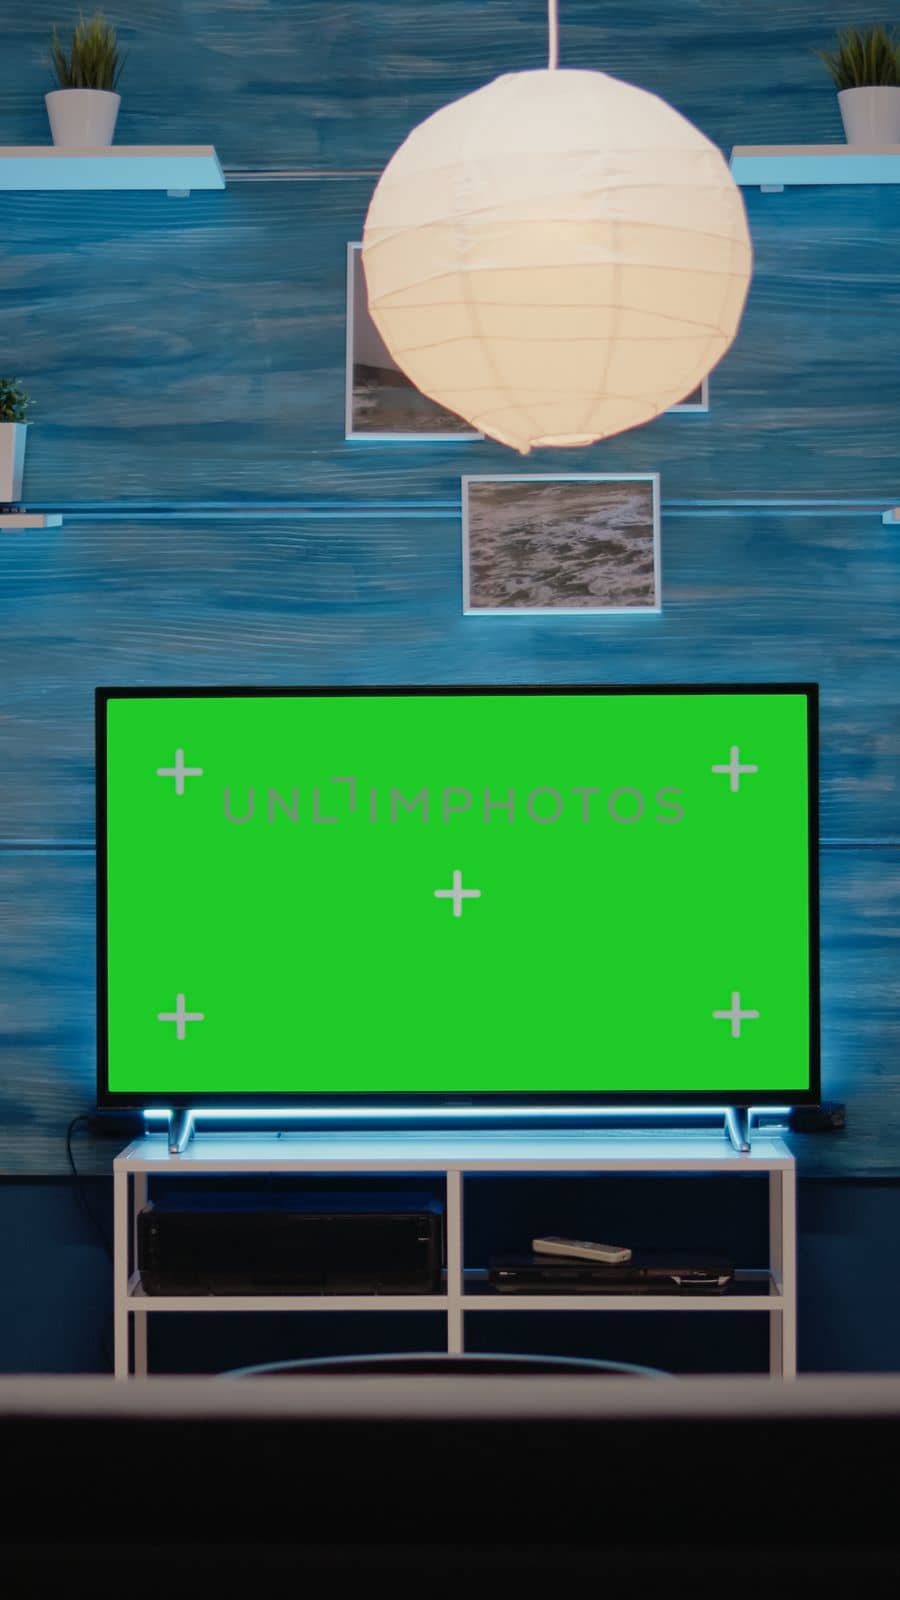 Green screen design on television in empty room at modern flat. Chroma key digital concept on monitor display used for blank mockup template, isolated media background for copy space